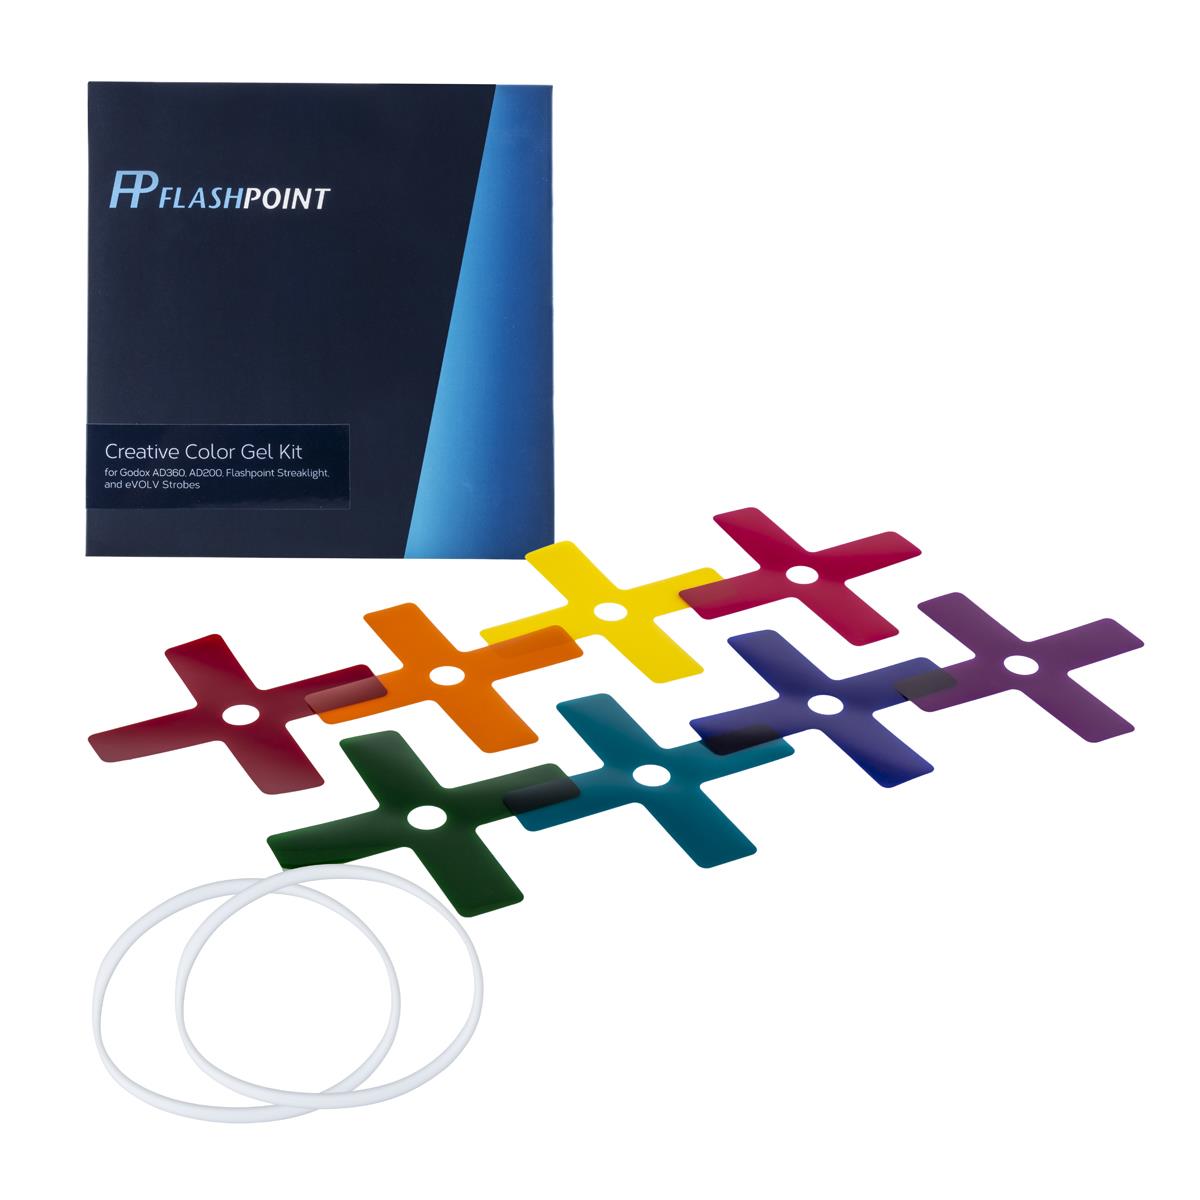 Image of Flashpoint Creative Color Gels for eVOLV